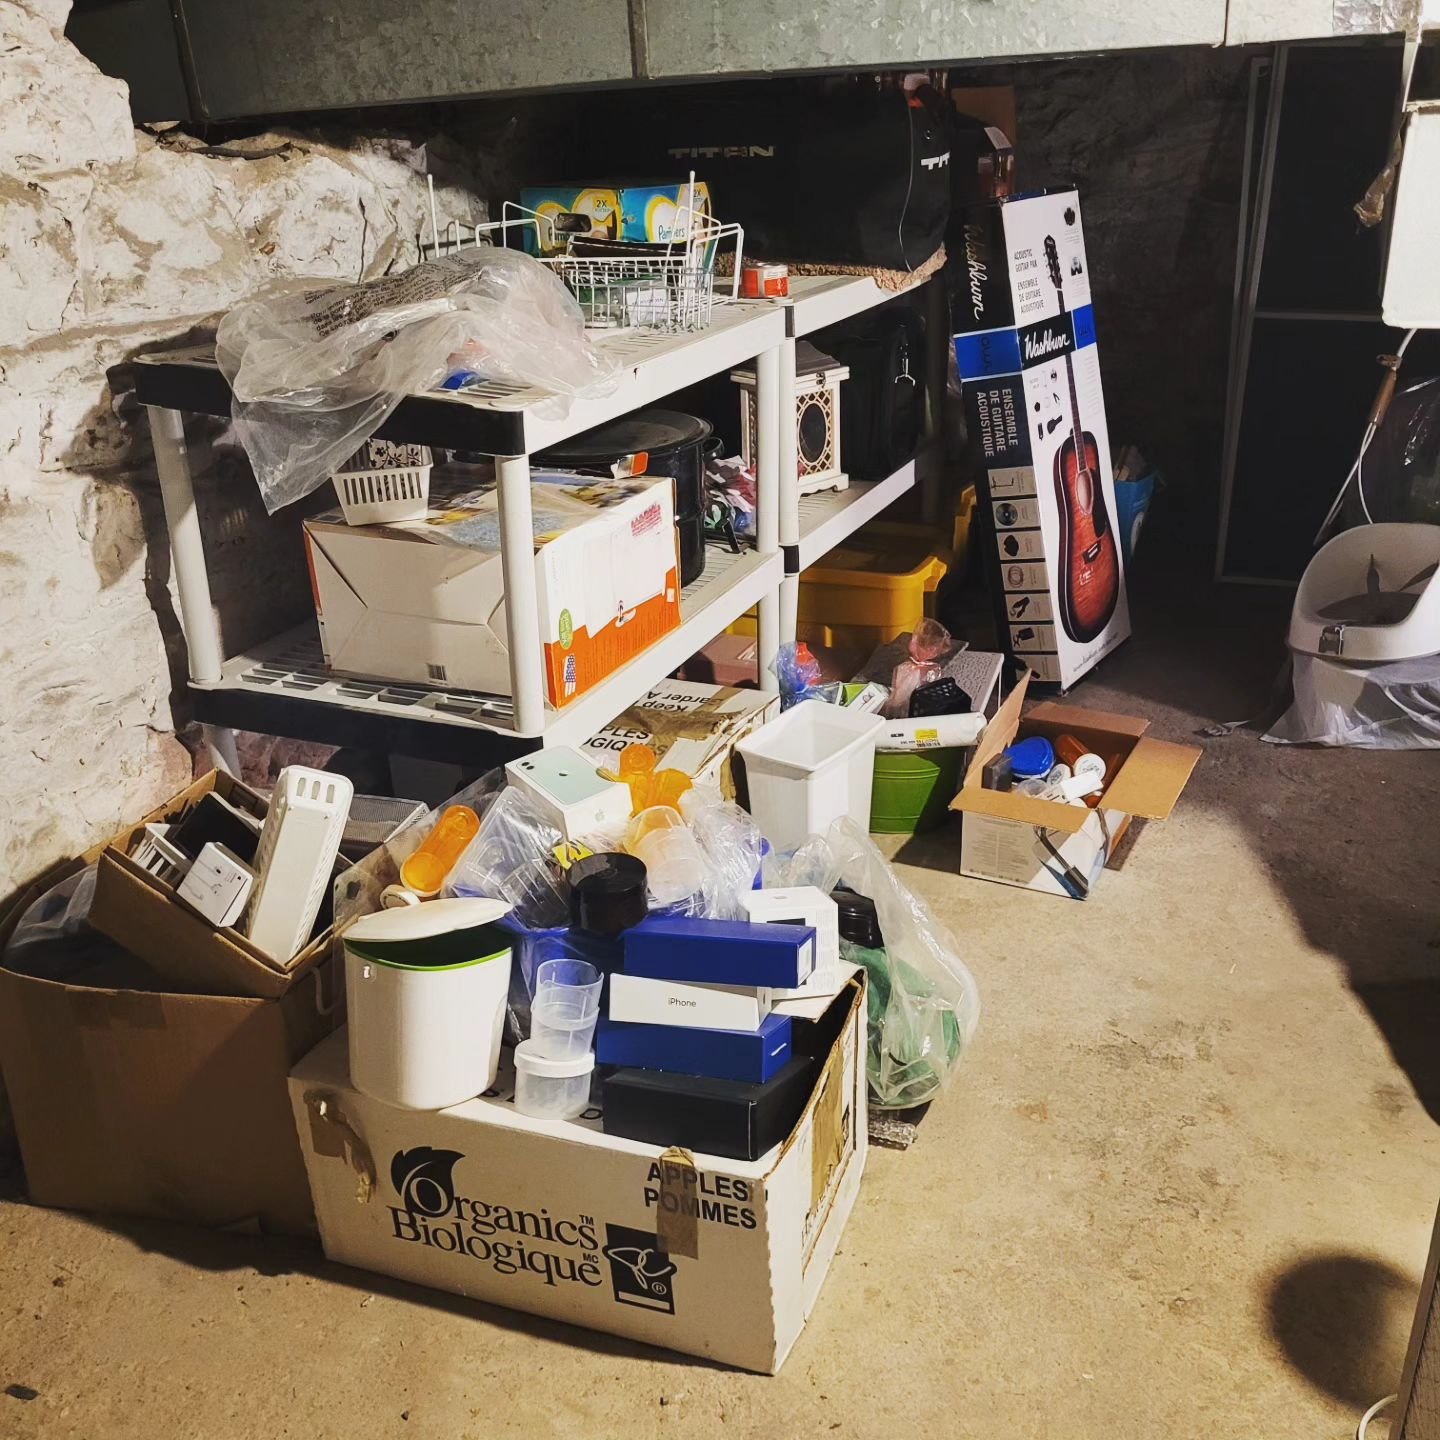 Basements end up being a place where many things go to &quot;die&quot; ☠️

Stuff that you don't really want or use, but you just have to keep...

Just remember when you are storing items in a basement, be mindful of moisture and temperature fluctuati